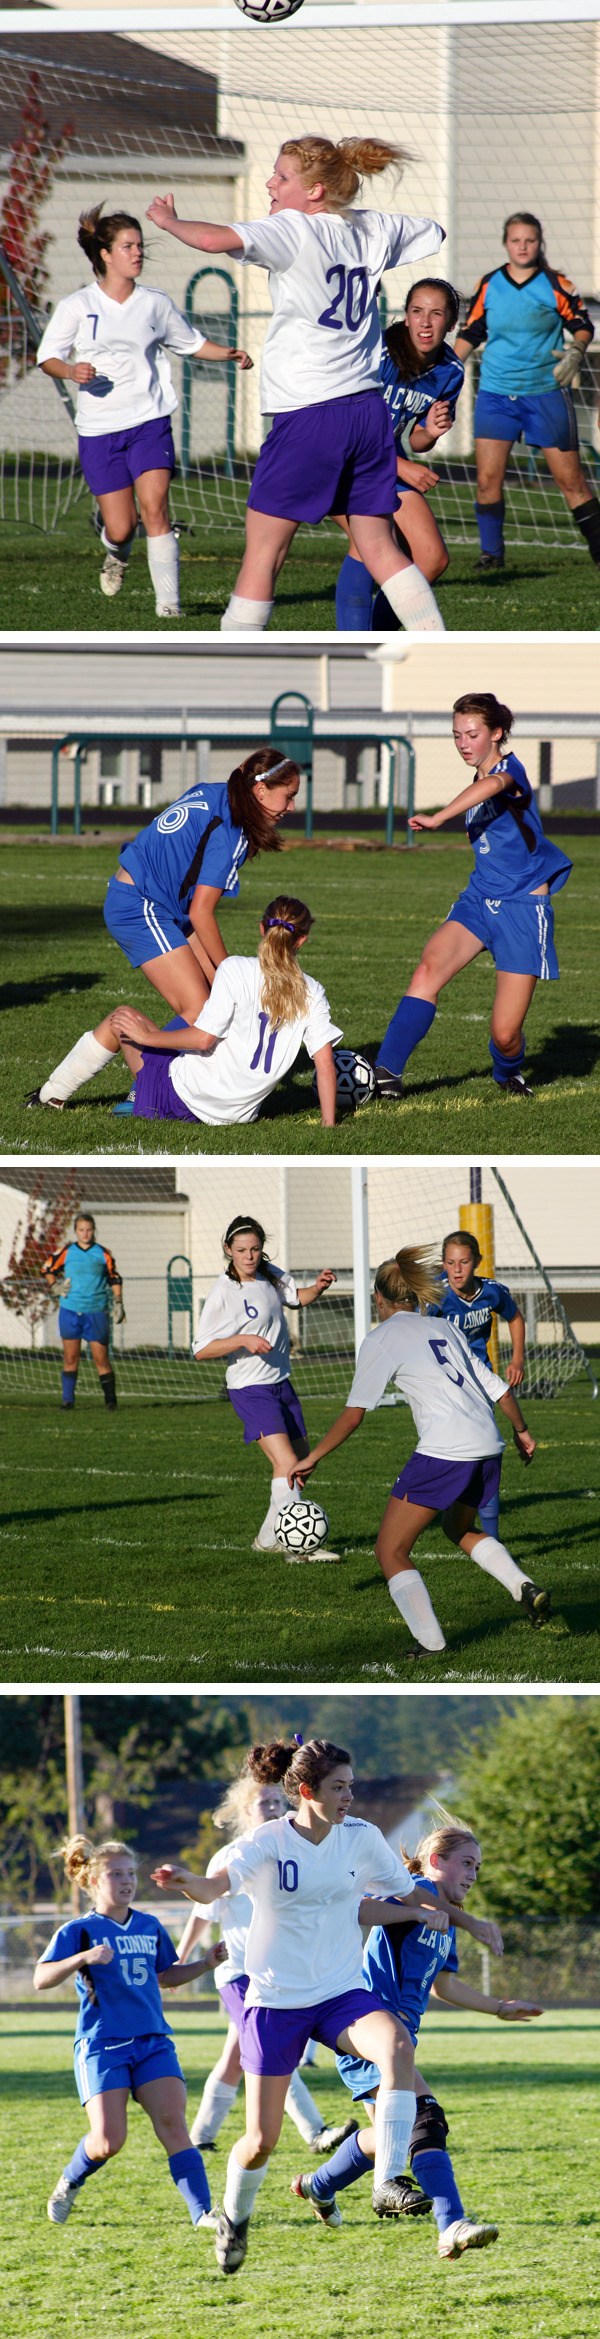 Top photo: Friday Harbor senior Maggie Andersen (20) tries to keep the ball in scoring position vs. La Conner